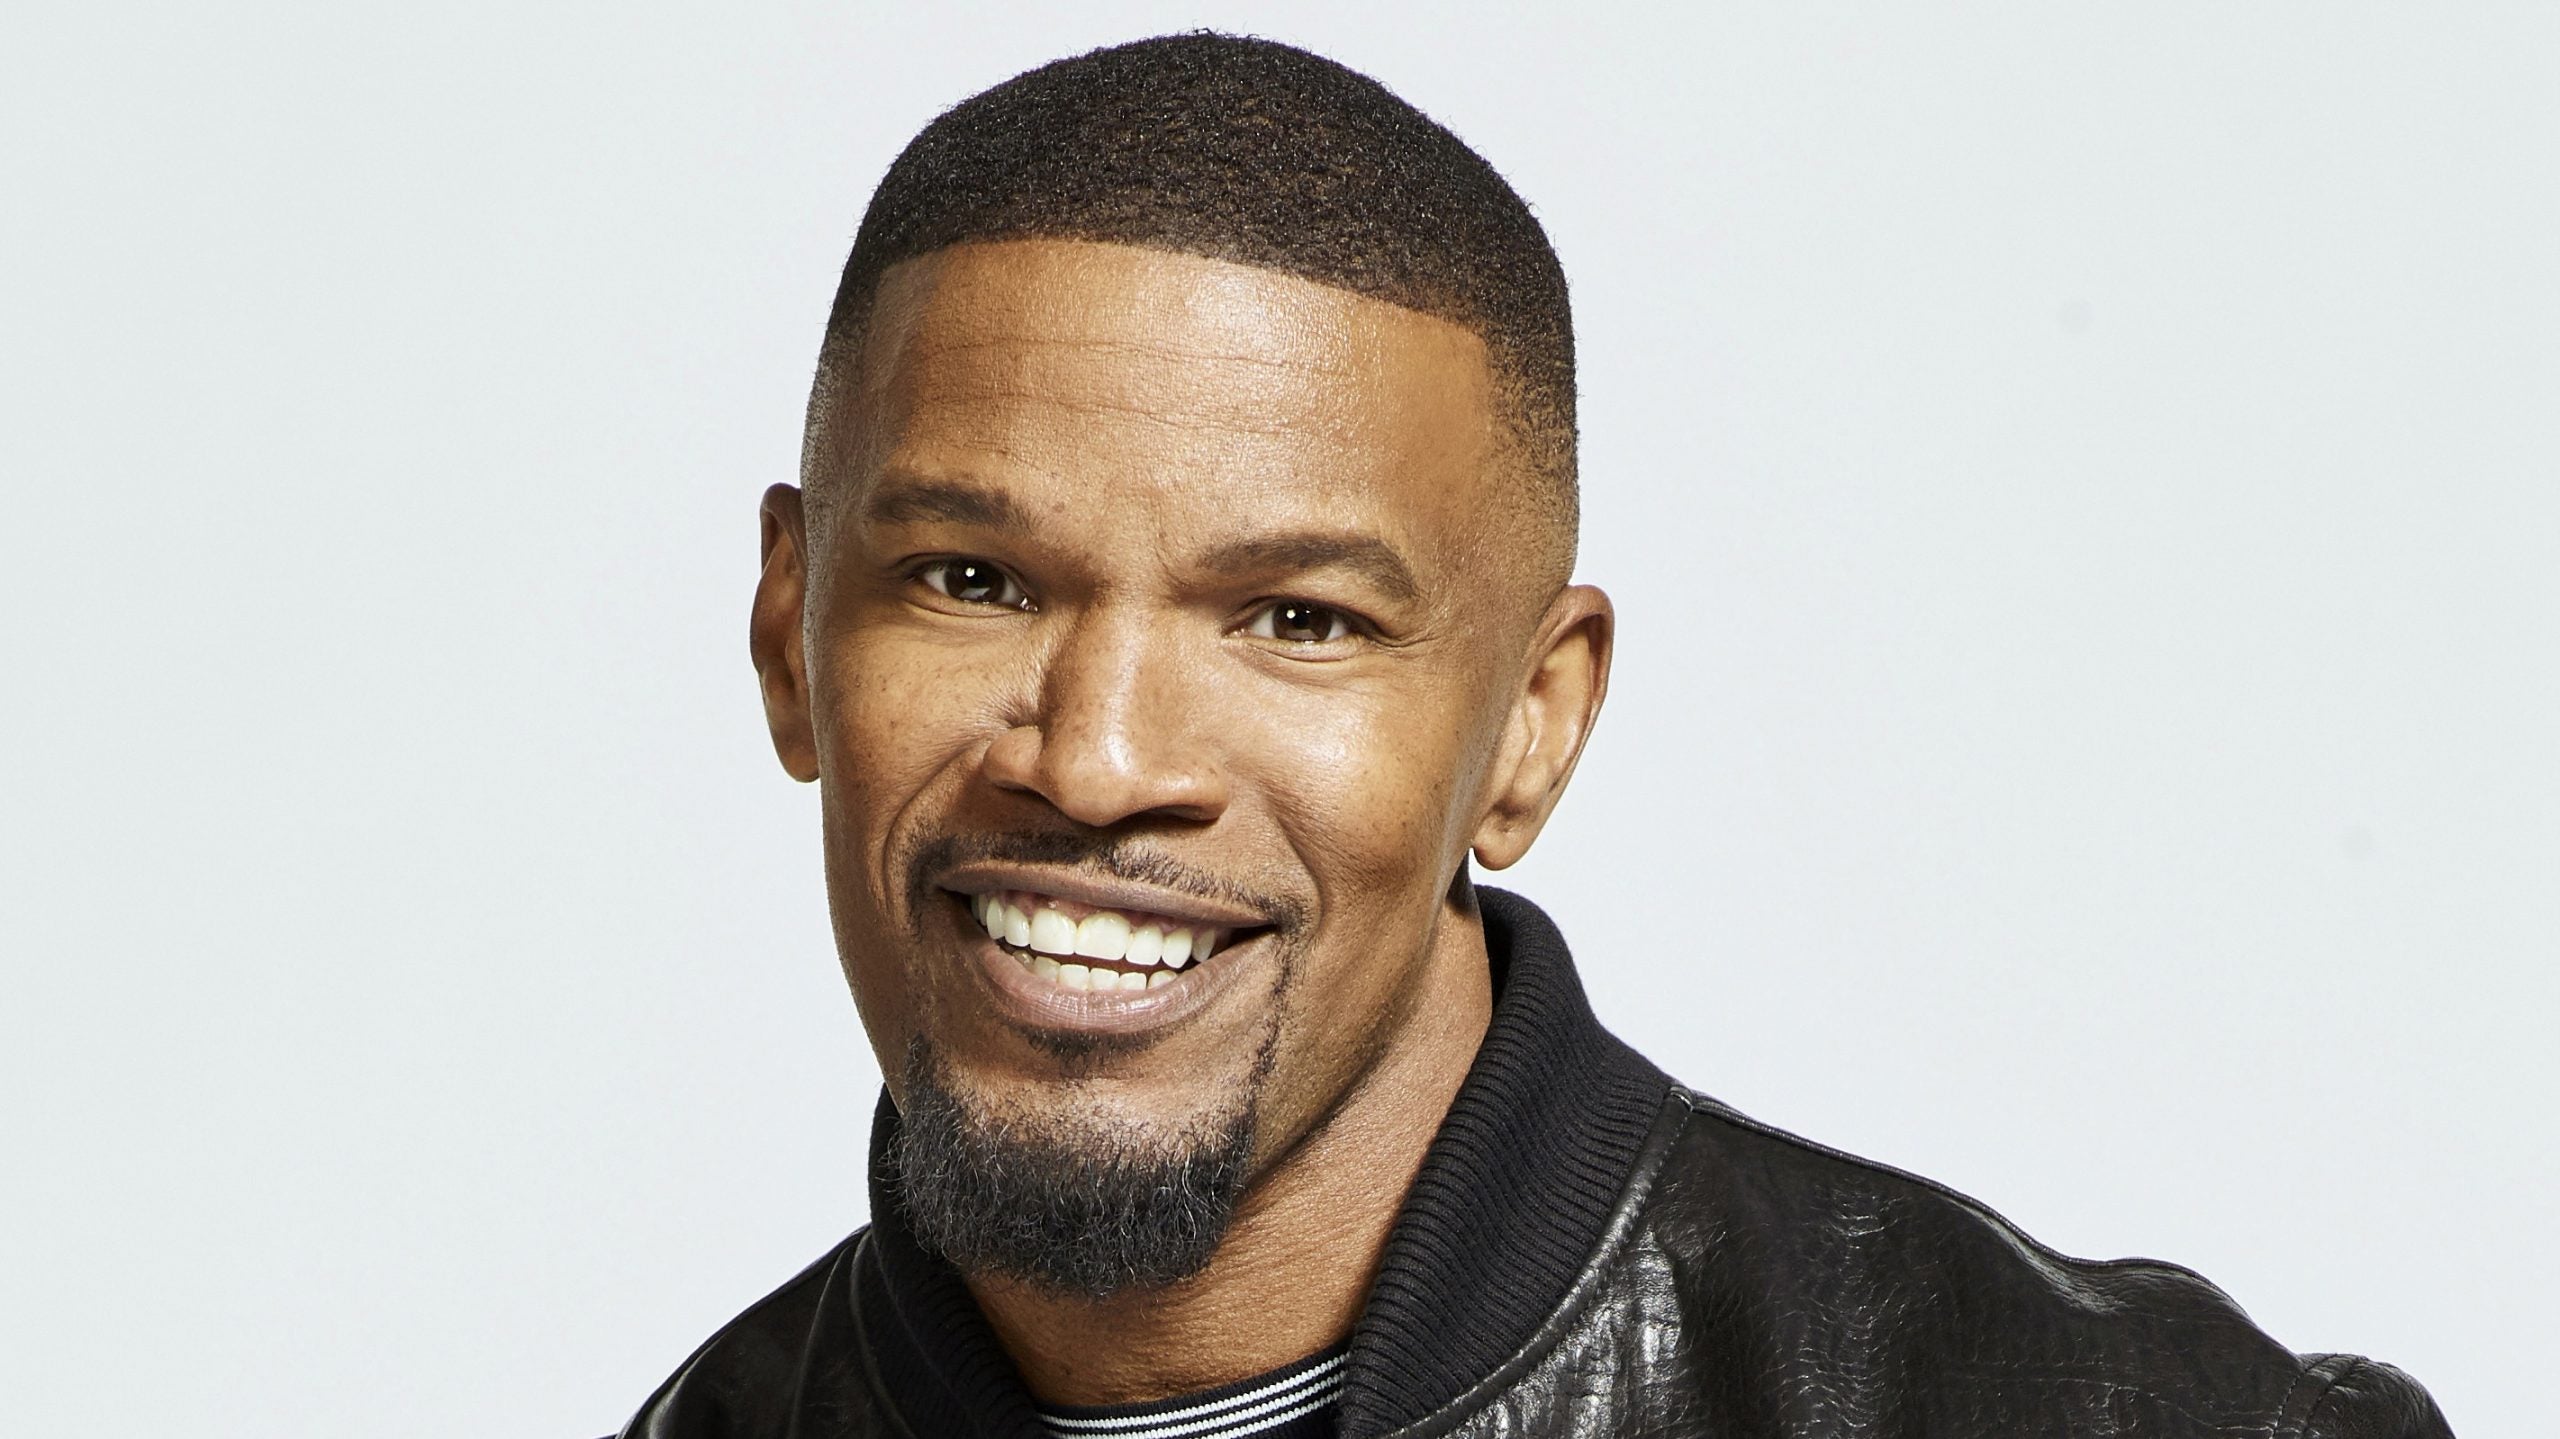 Jamie Foxx On Being An Oscar-Winning Actor And Game Show Host: ‘I’m Happy’